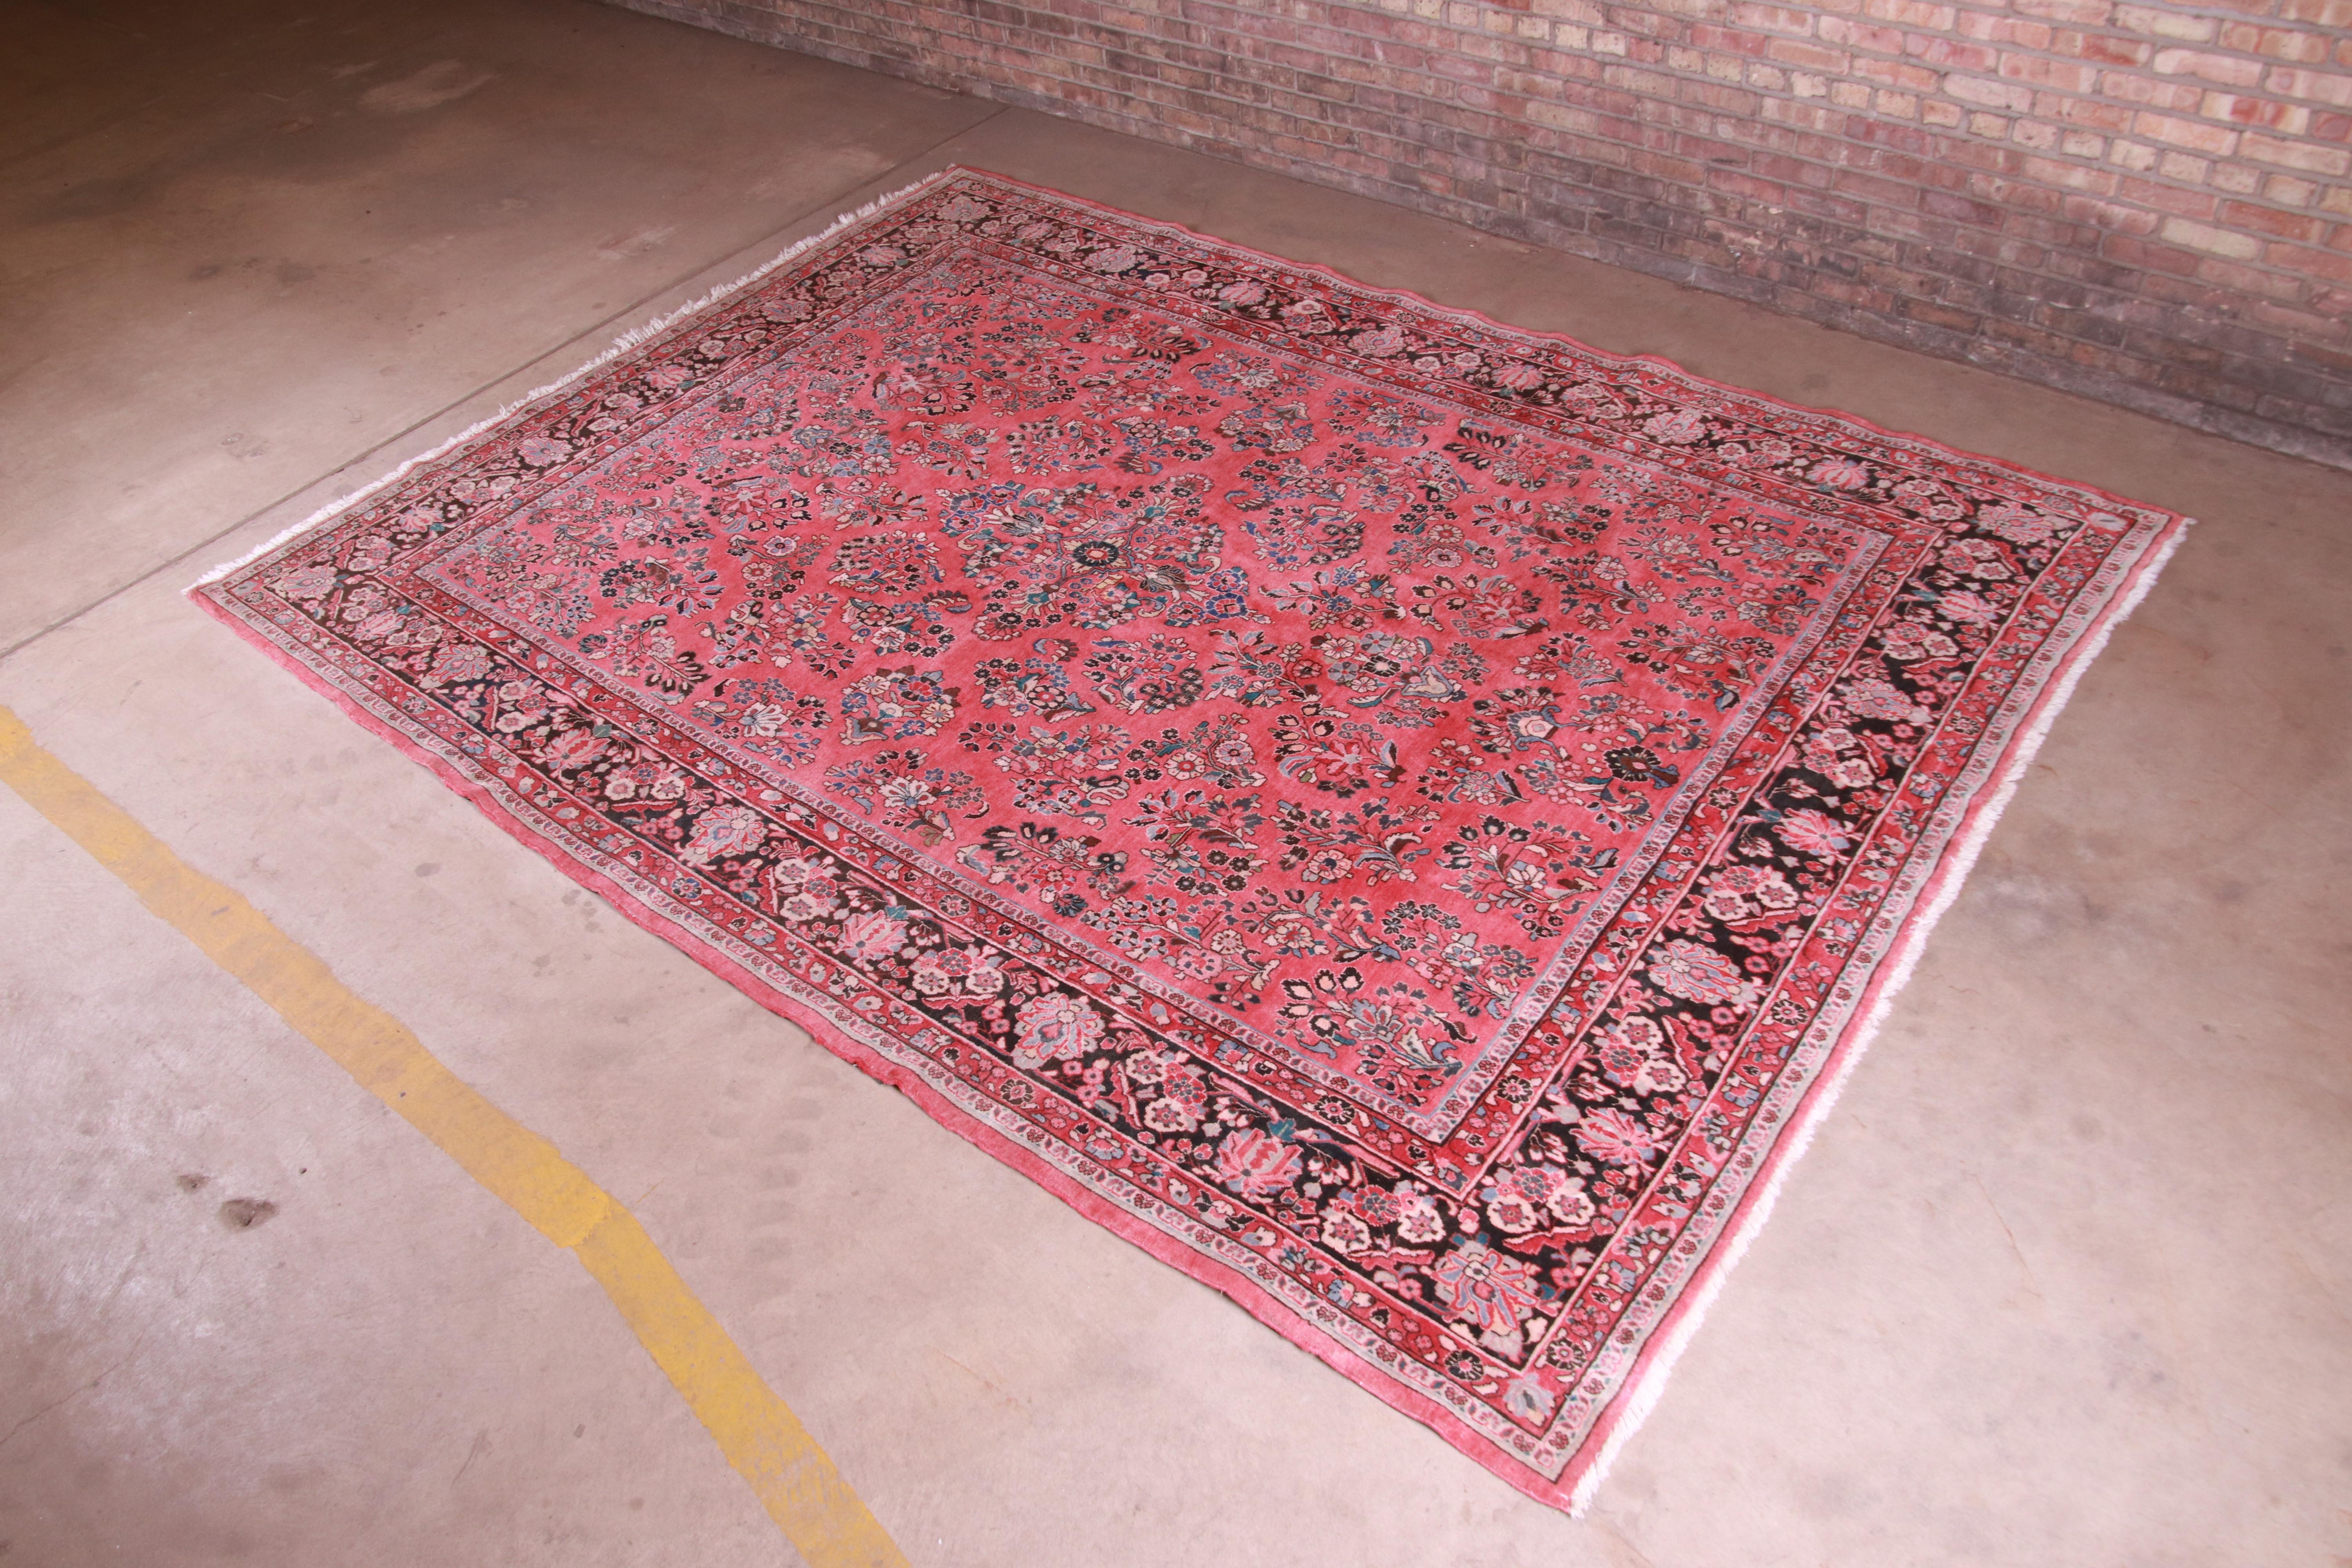 A gorgeous vintage hand knotted Persian Sarouk room size rug

Persia, mid-20th century

Classic design with floral sprays and bouquets

Measures: 8